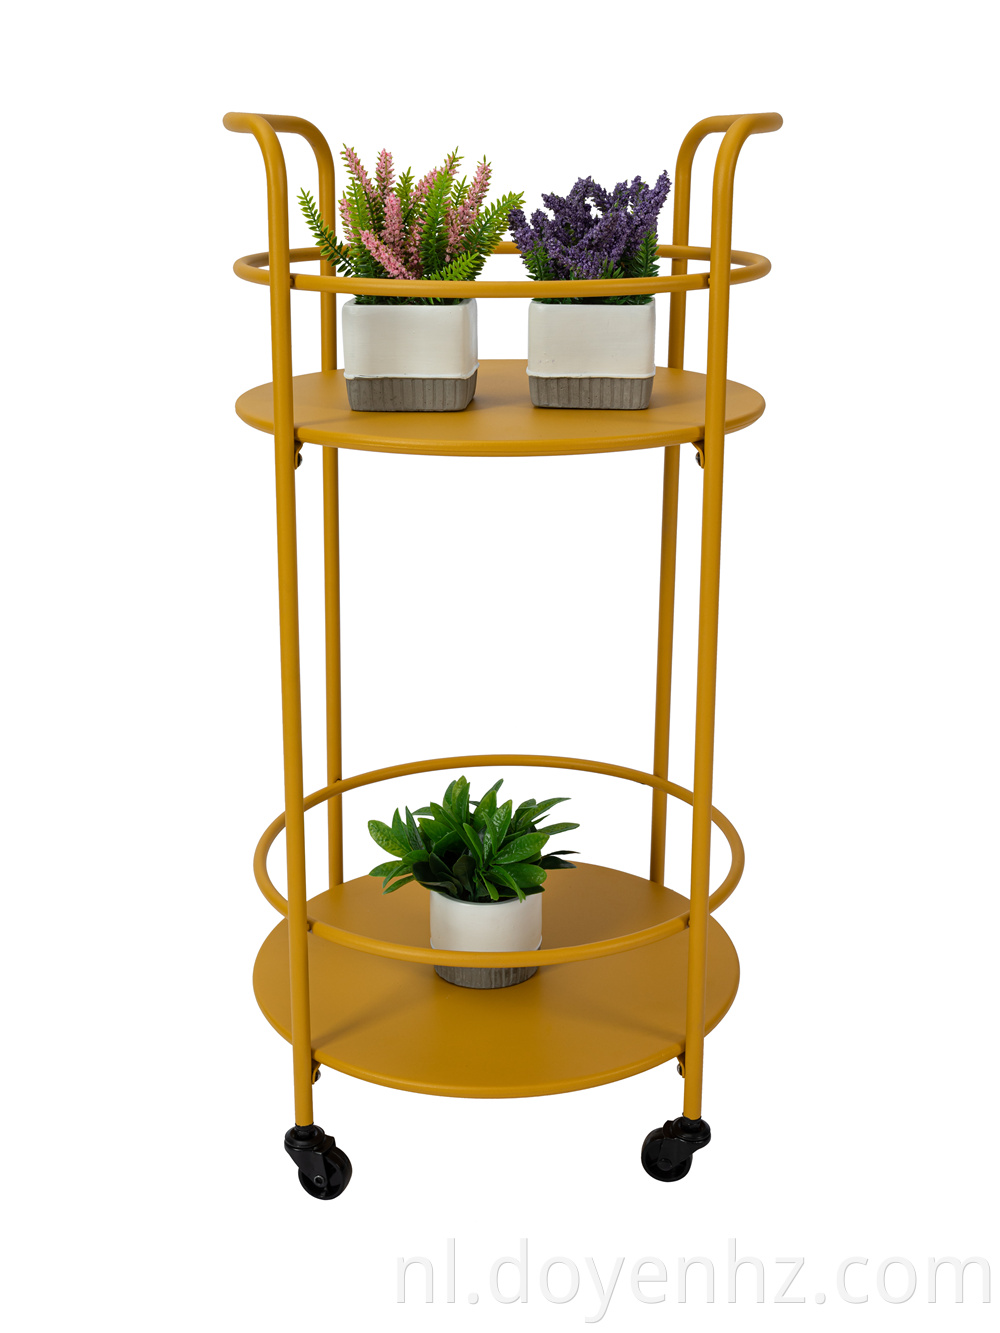 2-Tier Metal Round Rolling Cart with Handle